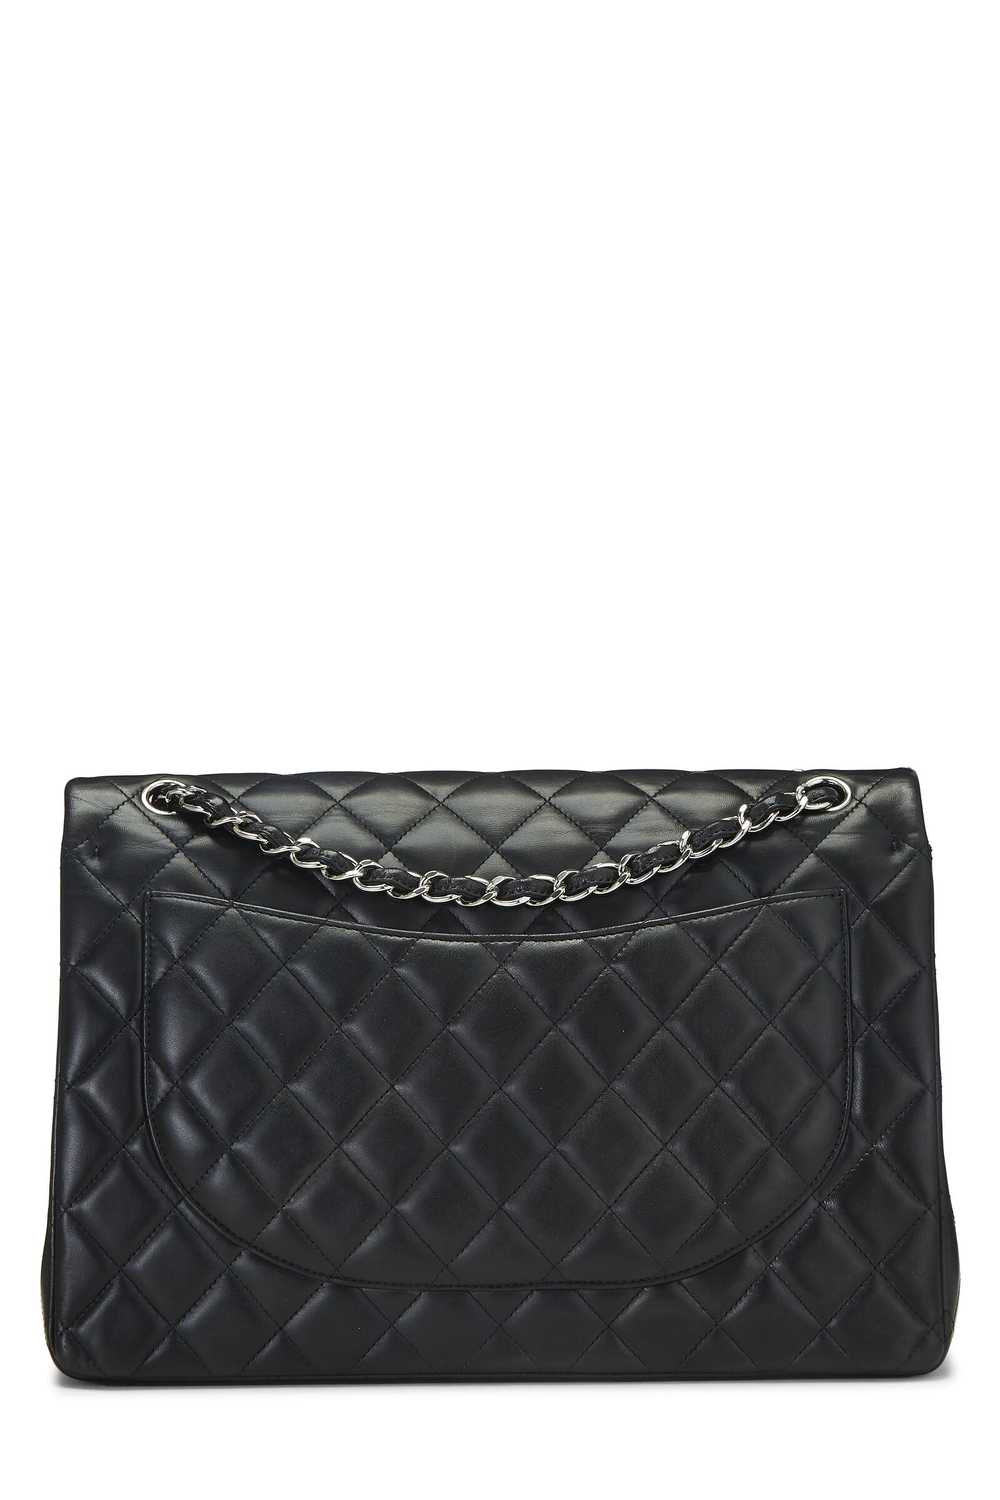 Black Quilted Lambskin New Classic Double Flap Ma… - image 5